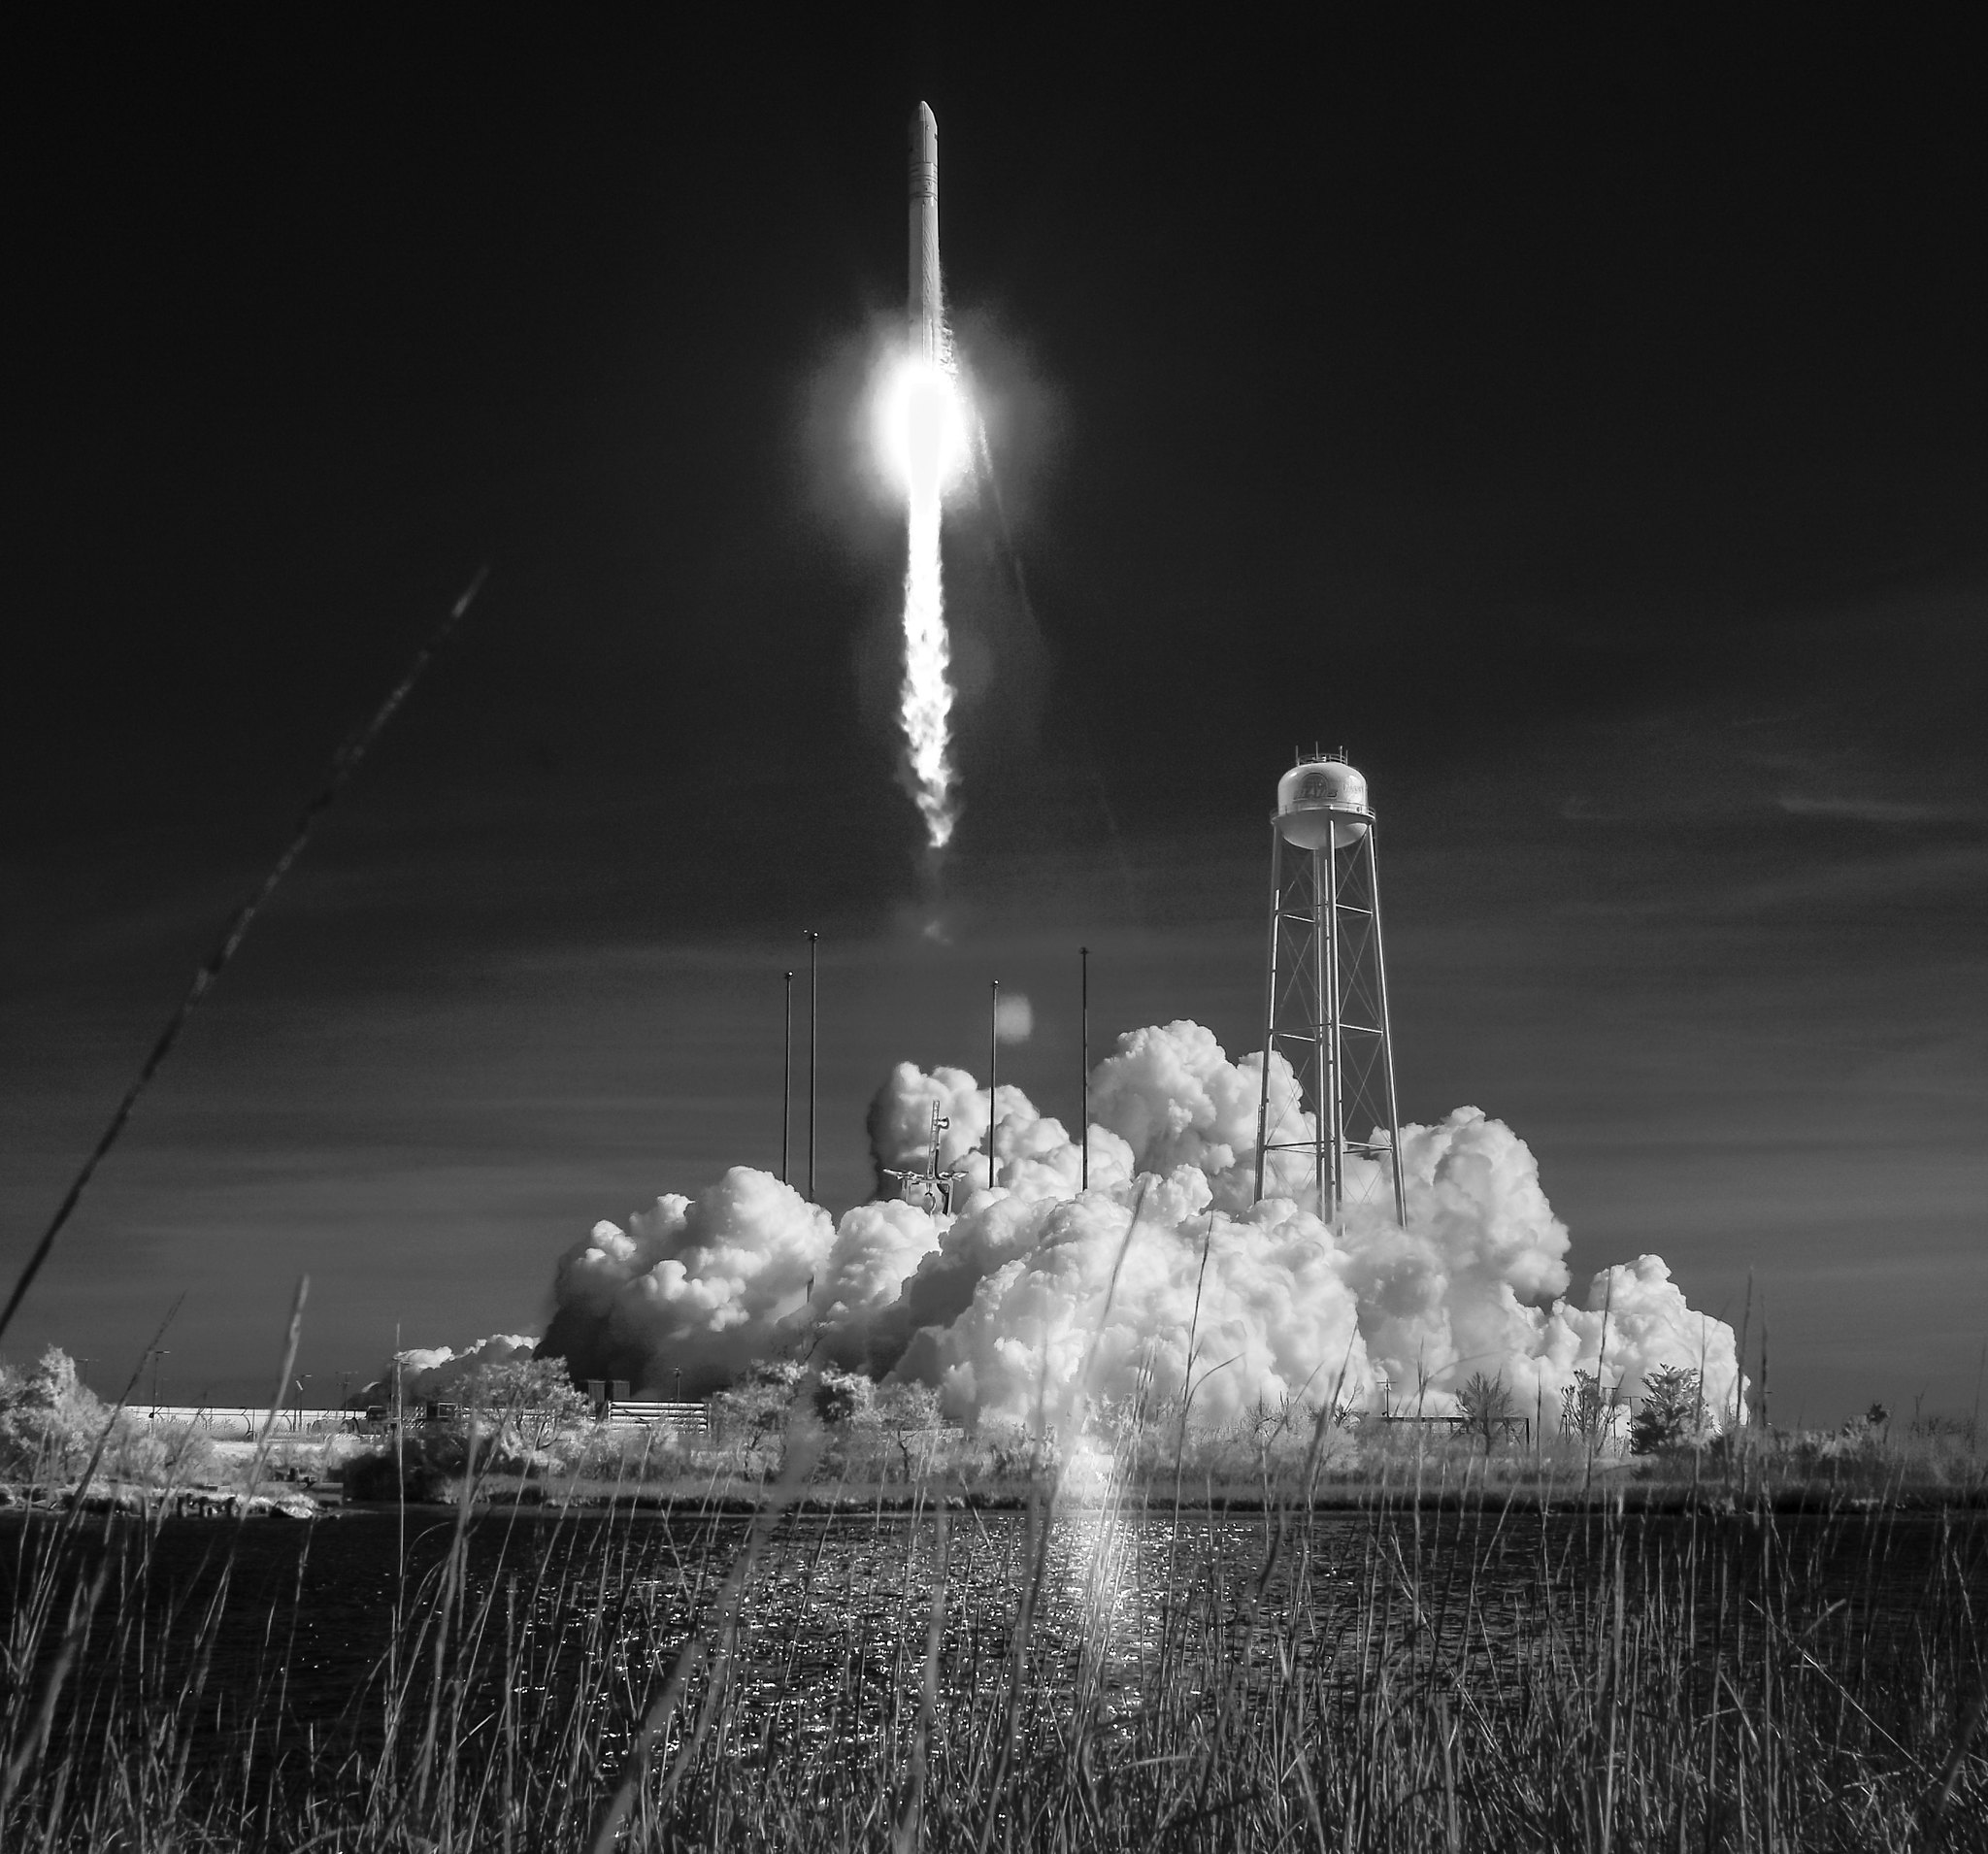 The Northrop Grumman Antares rocket, with Cygnus resupply spacecraft onboard, is seen in this black and white infrared photo